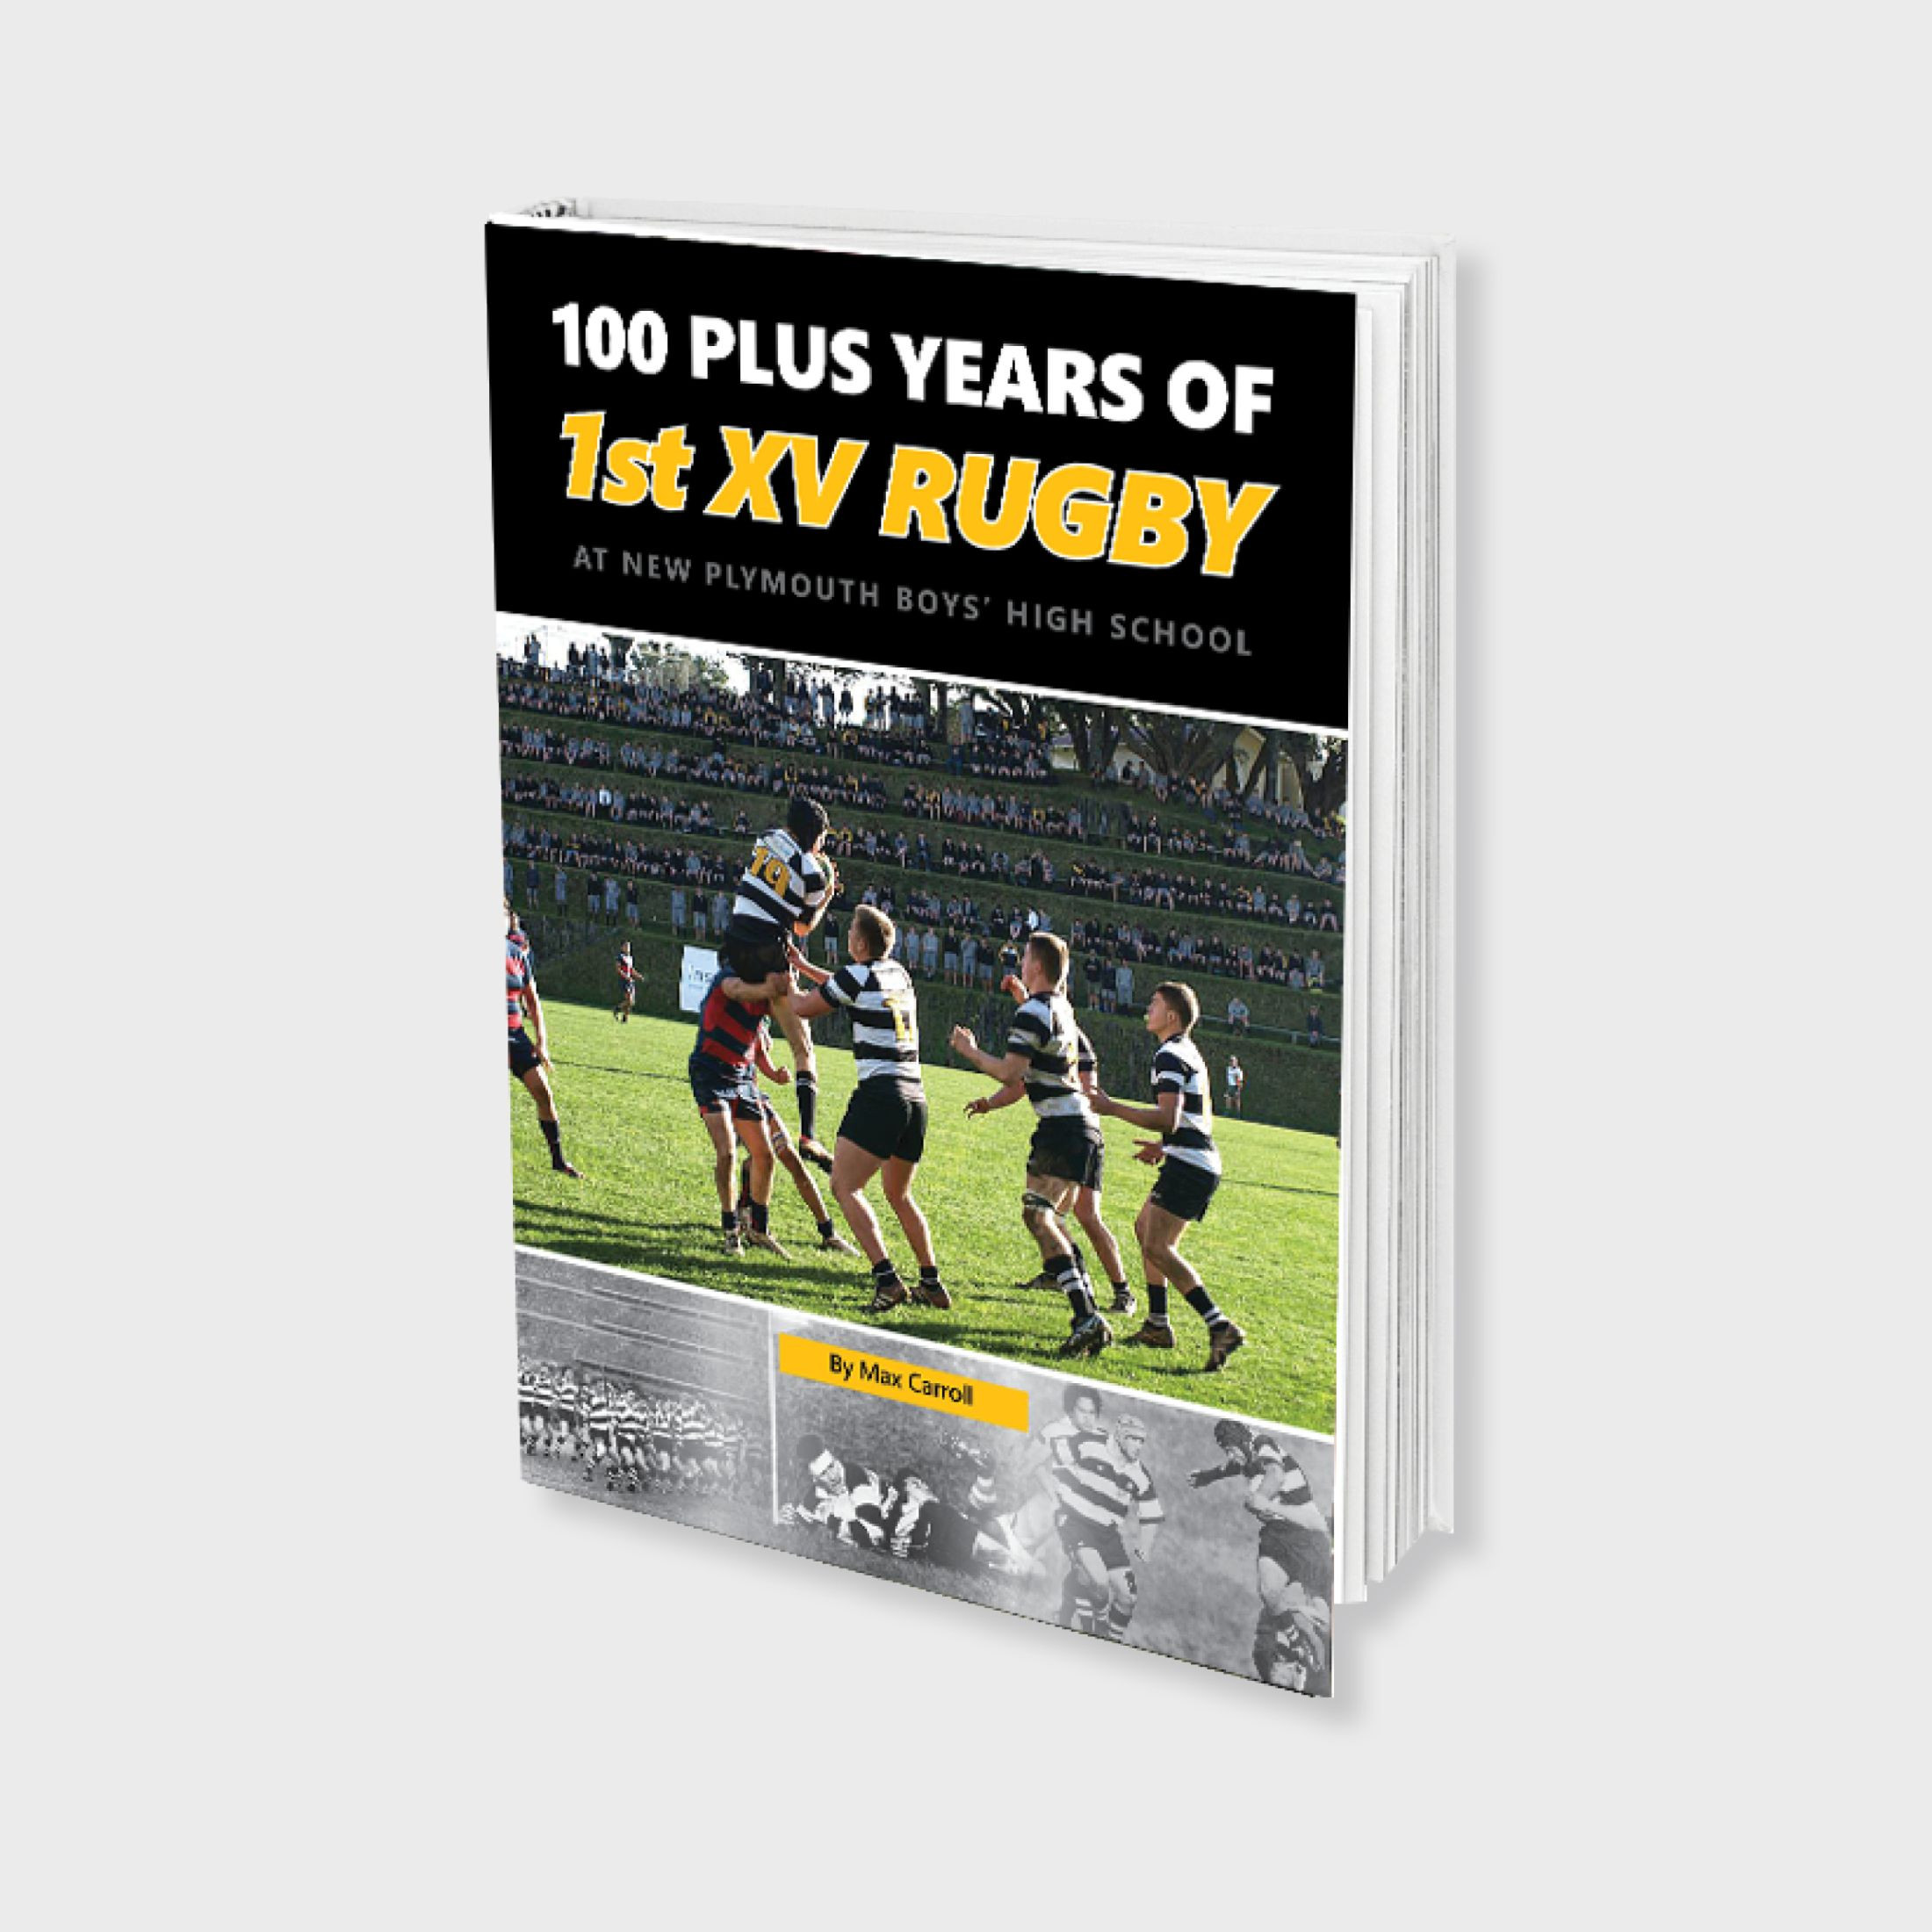 100 Plus Years of 1st XV Rugby at NPBHS